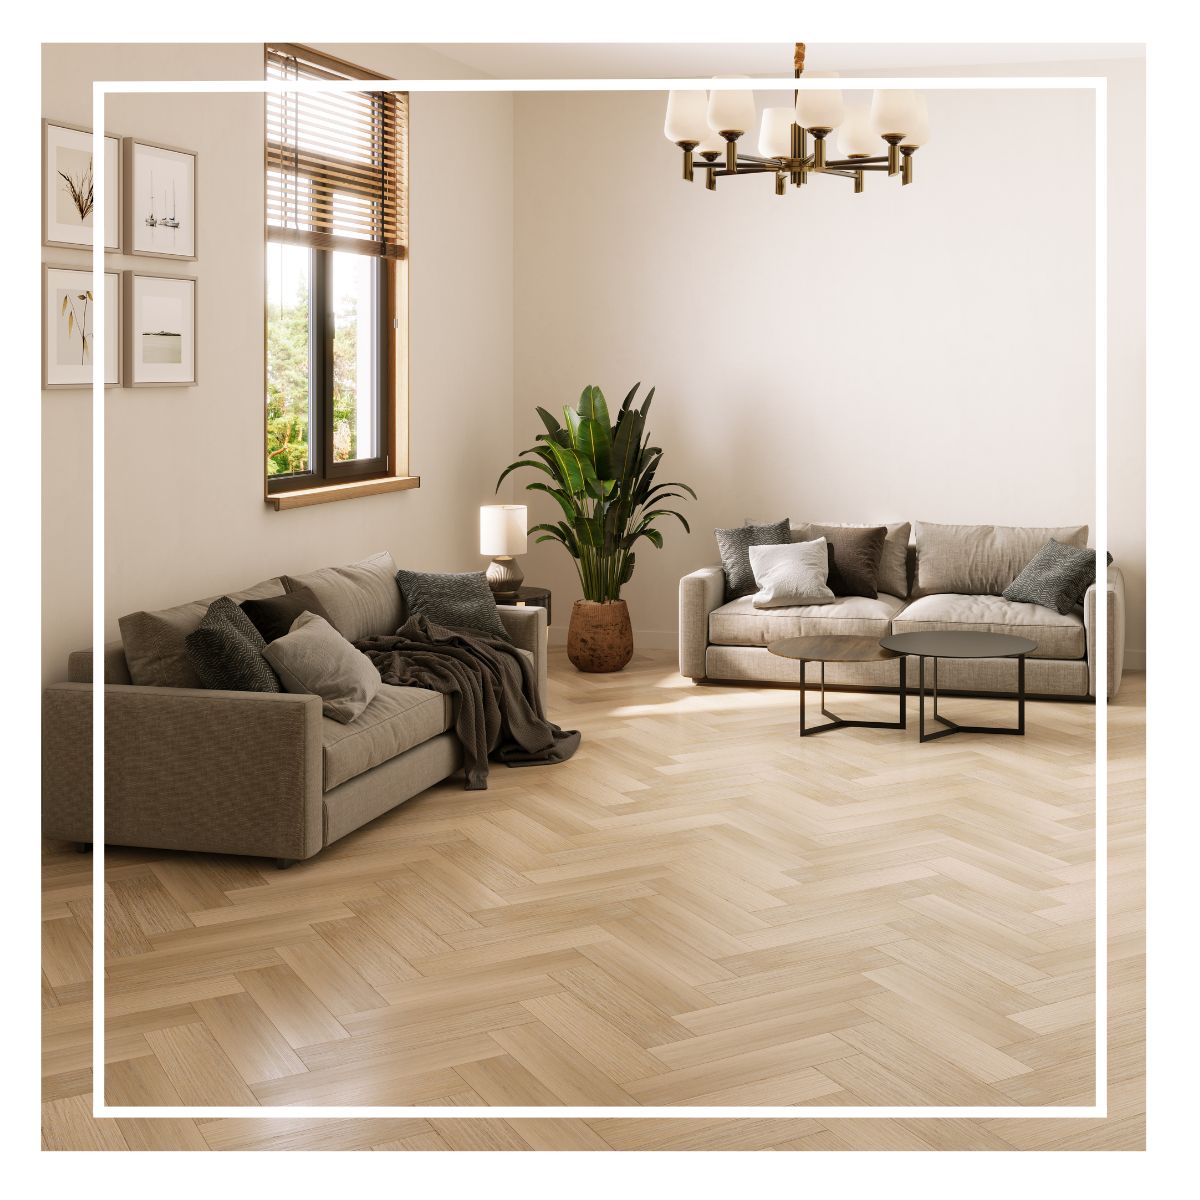 Light and airy, the grain and depth of the Limed Oak Herringbone with its light grey & beige tones help brighten up even the darkest of rooms. Herringbone wooden flooring is an increasingly popular yet timeless flooring pattern that adds sophistication to any space. #Herringbone